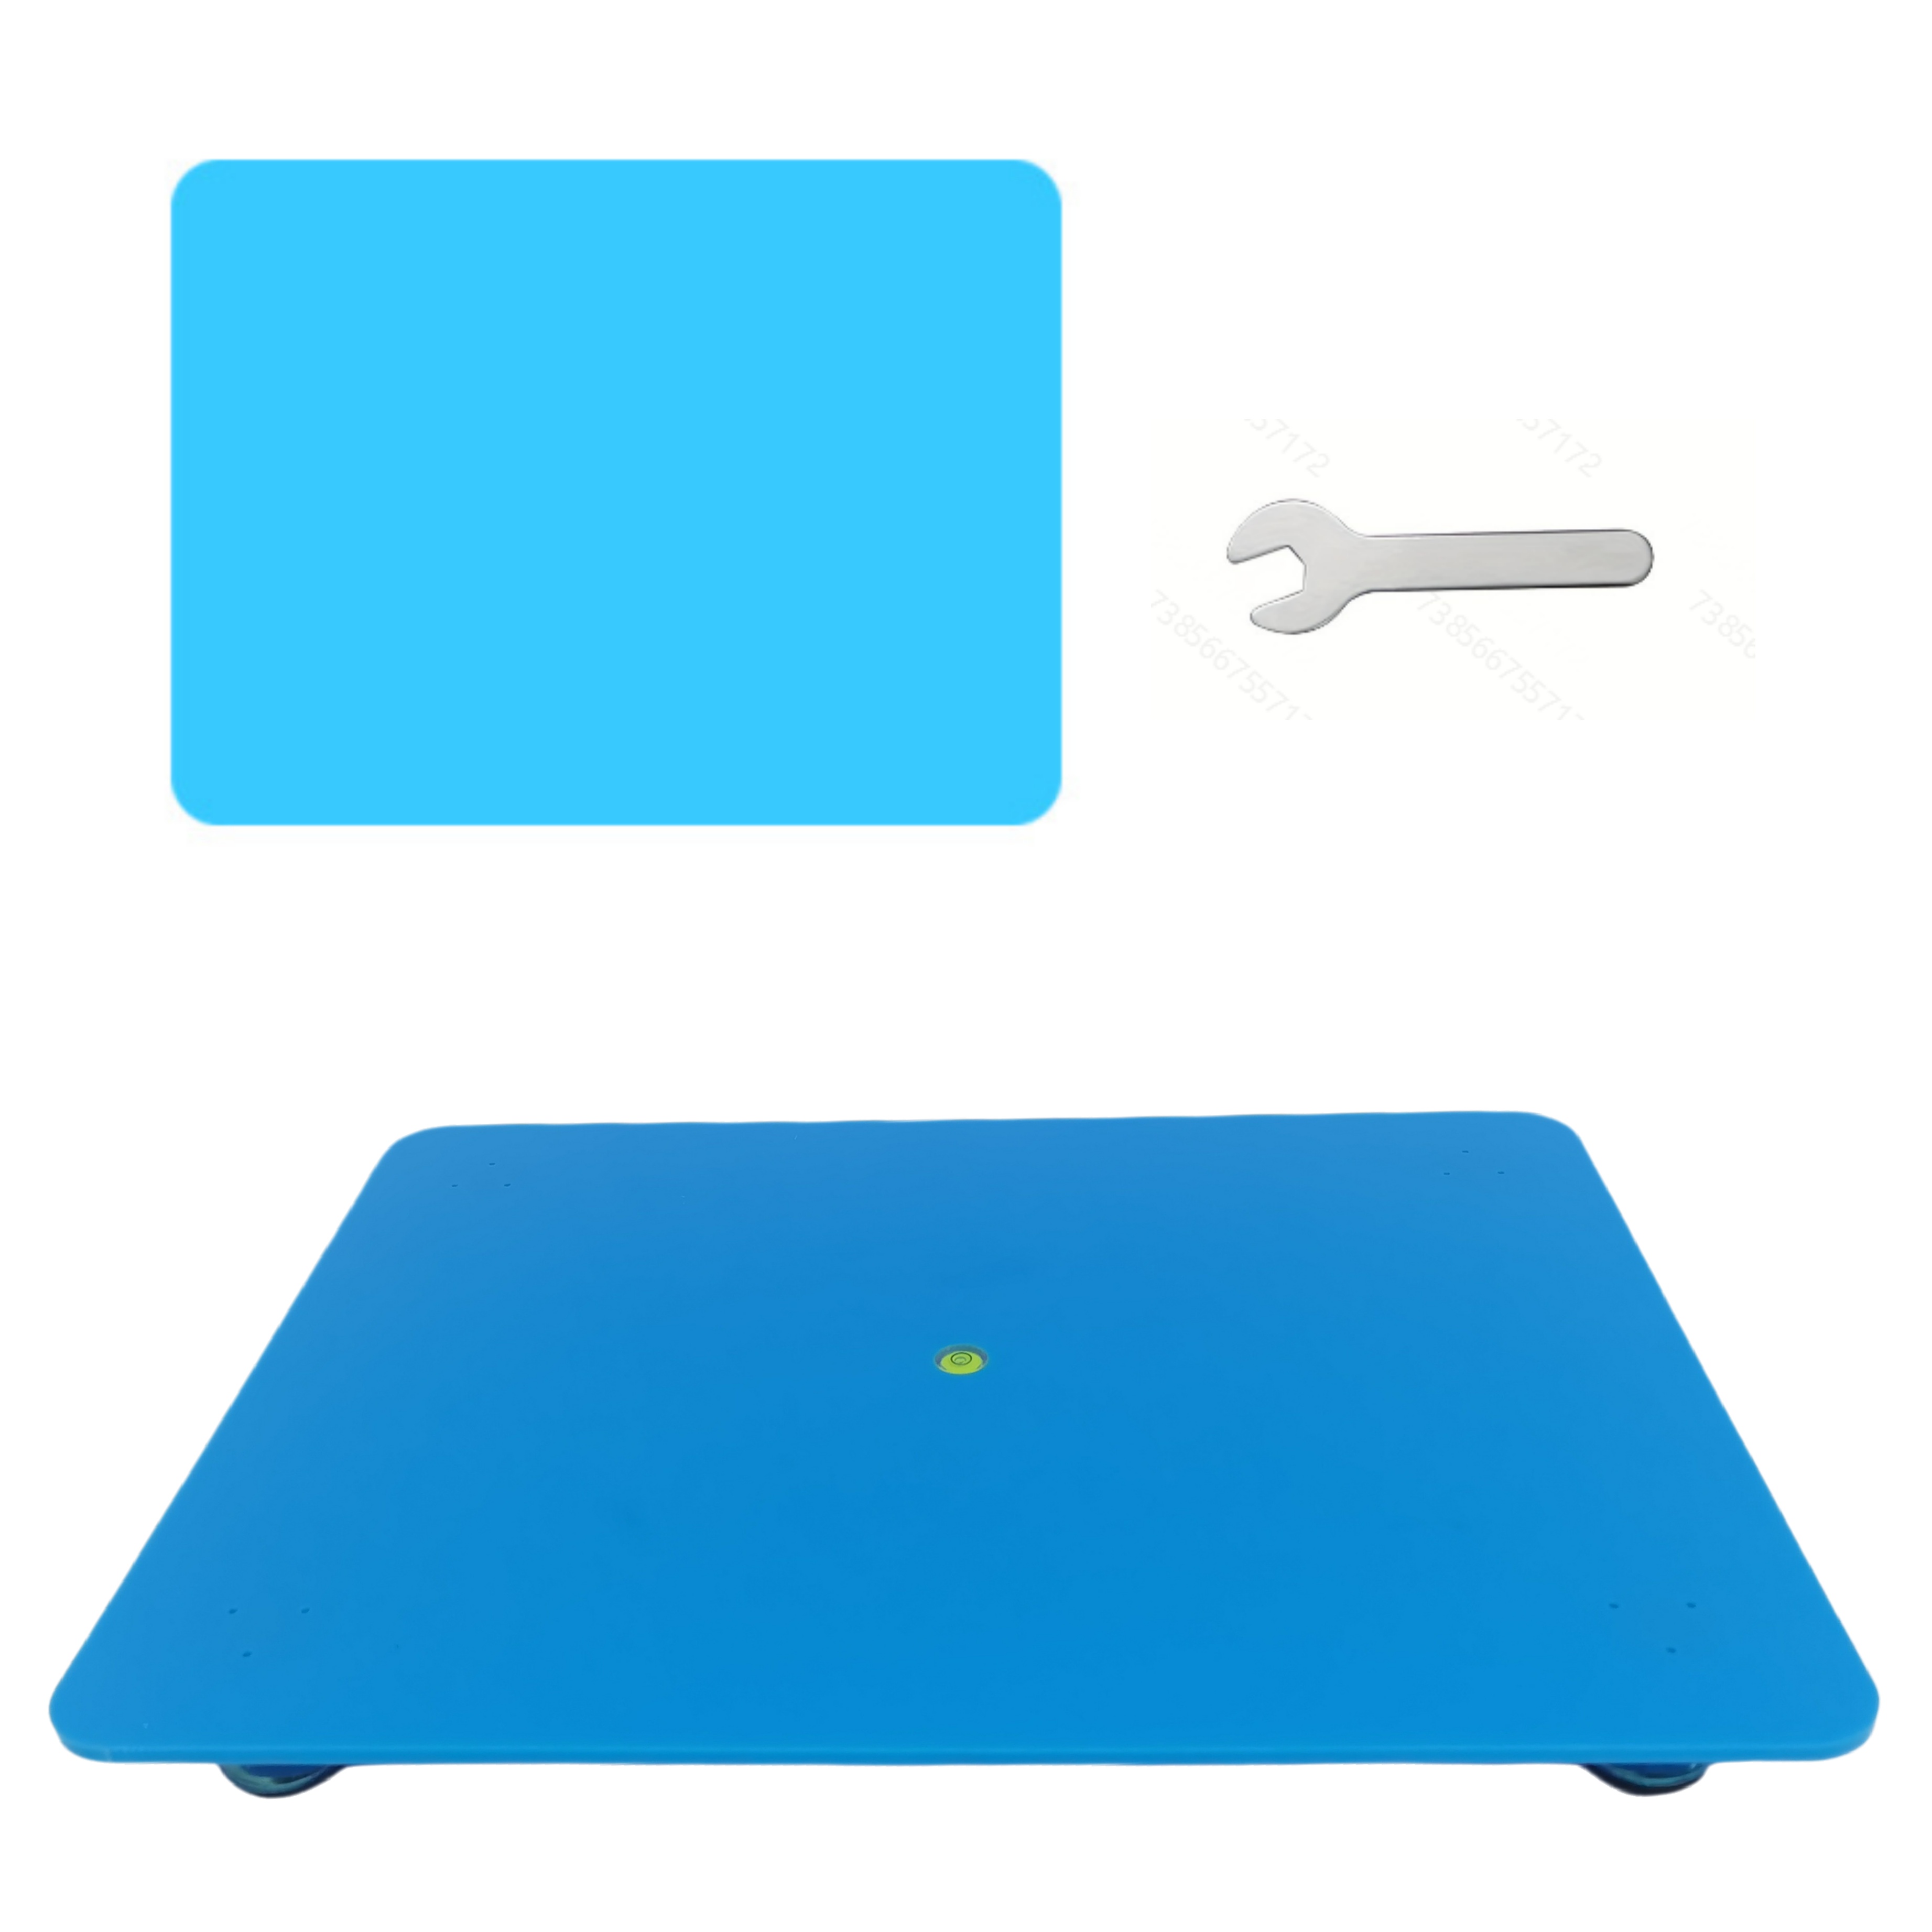 Level Board For Resin Acrylic Resin Leveling Table For Epoxy Resin  Adjustable Art Supplies Durable Leveling Table